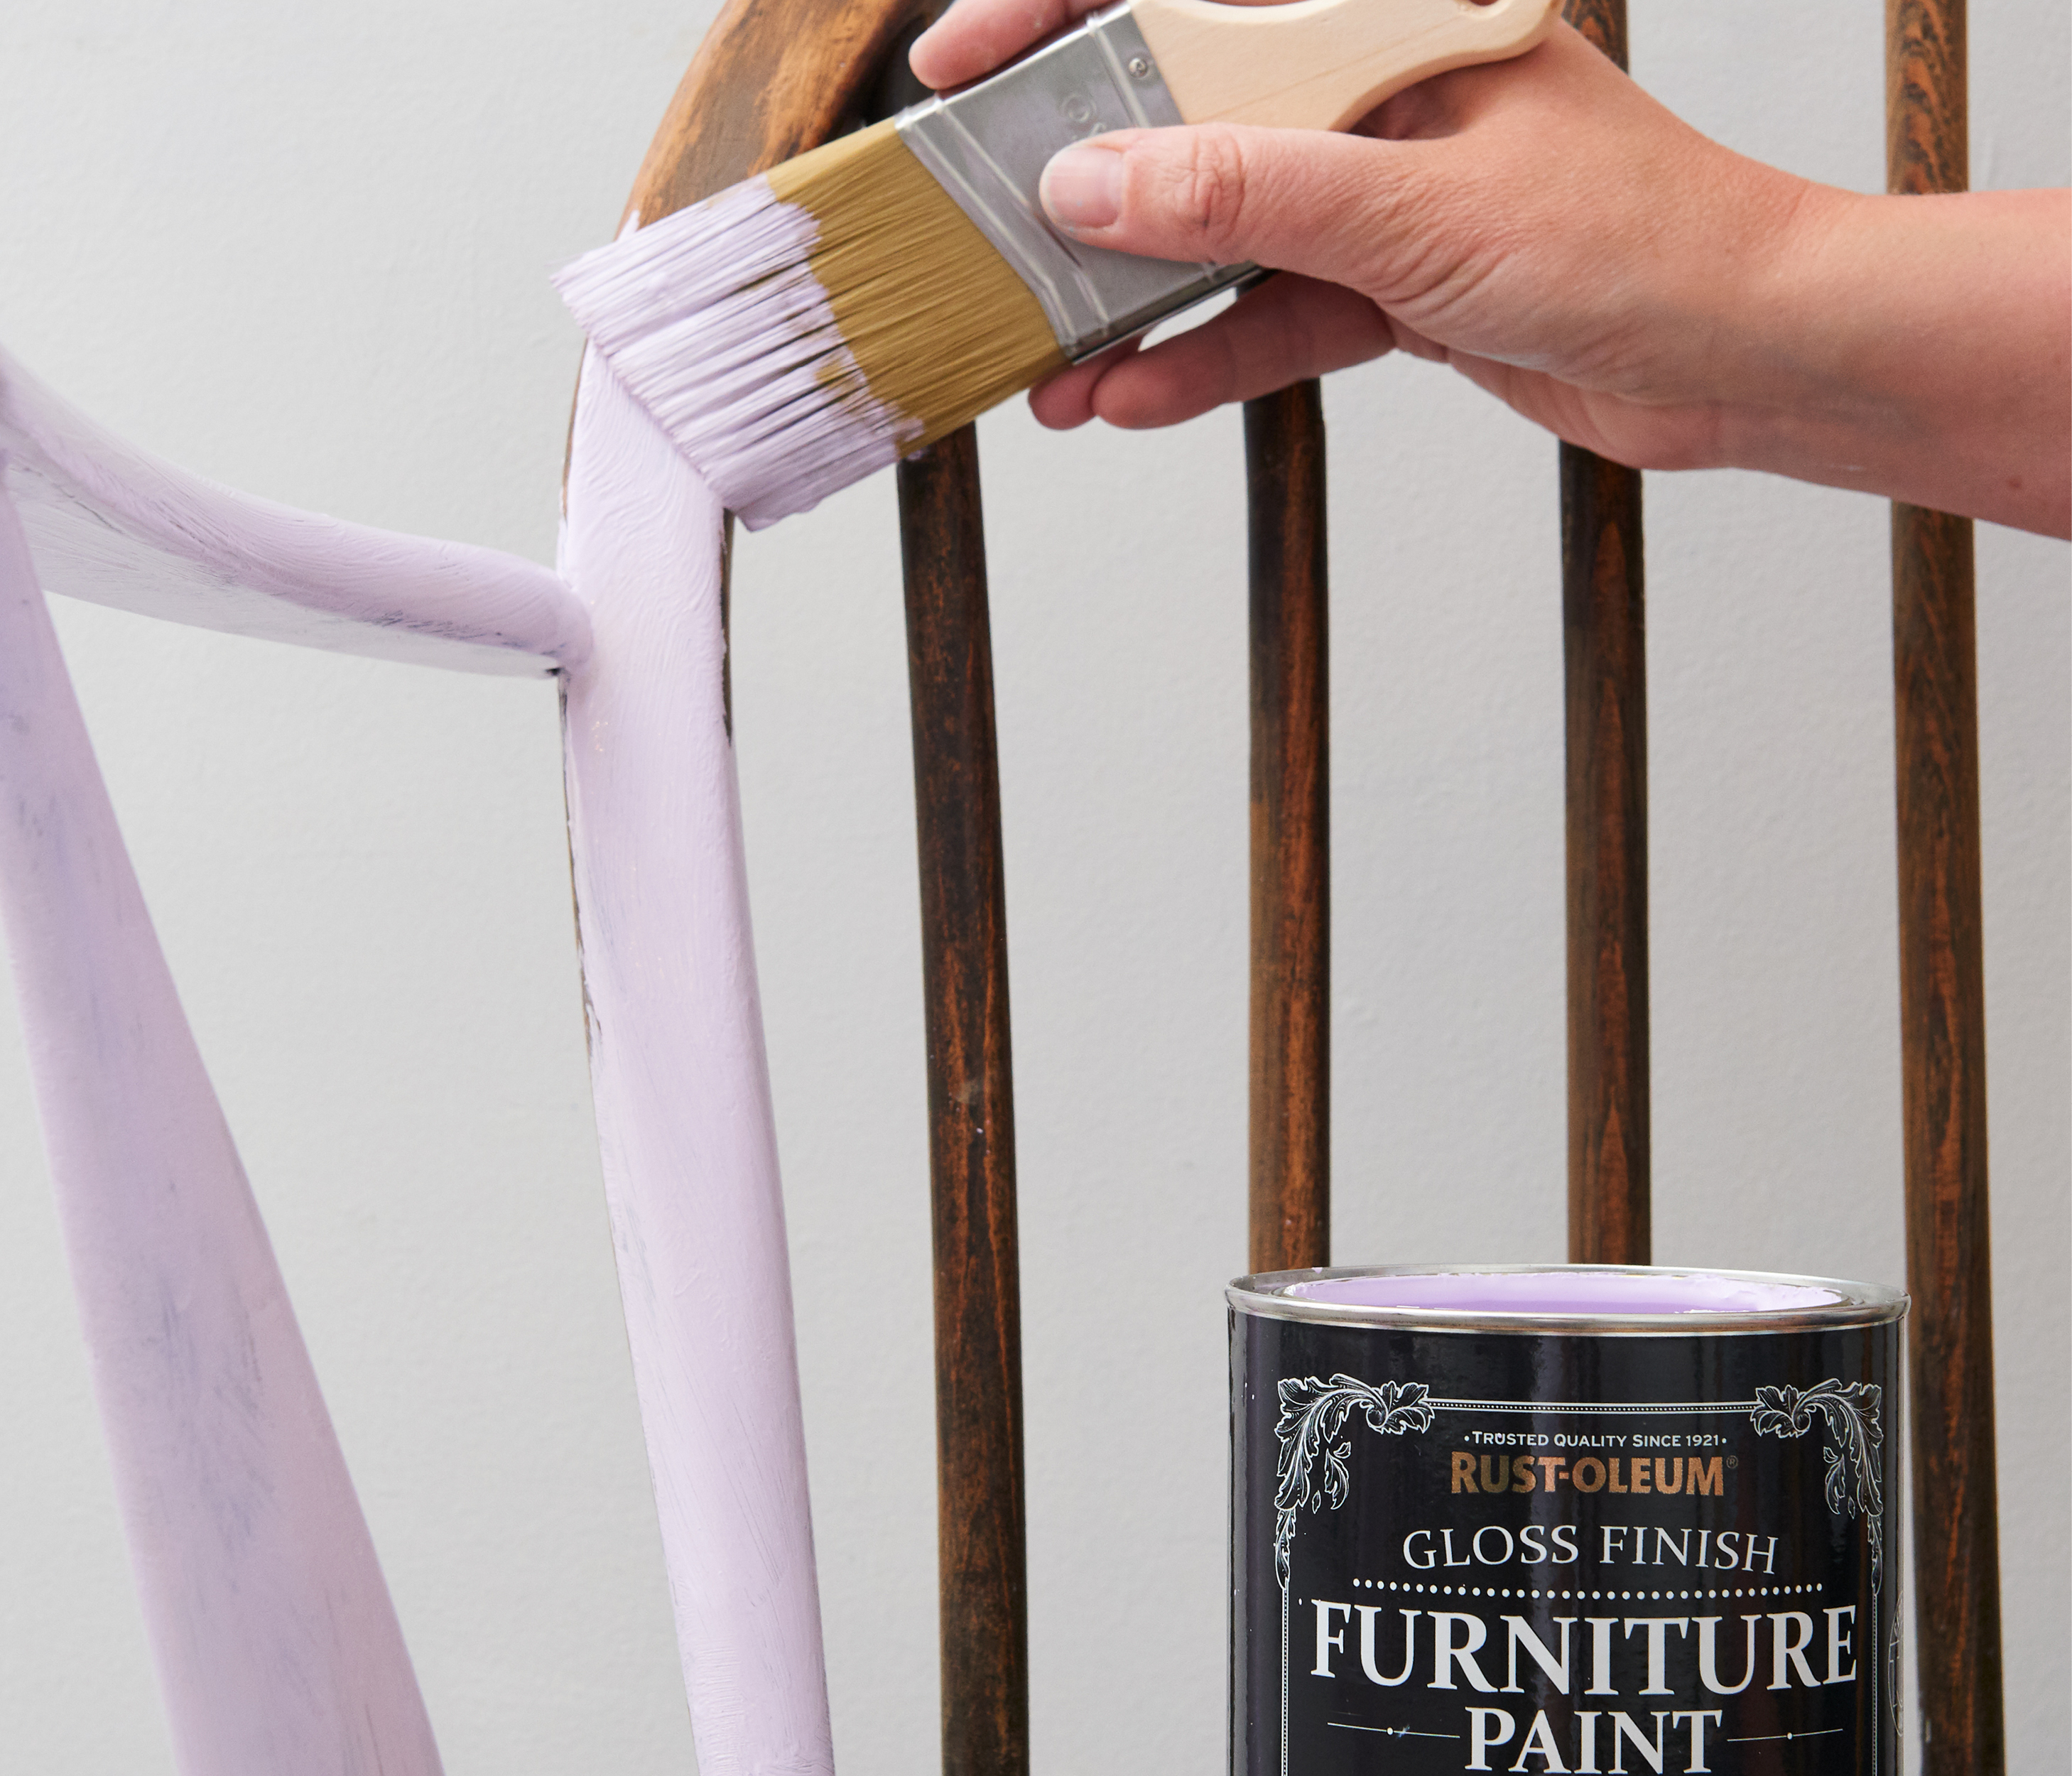 Gloss furniture paint - violet macaroon